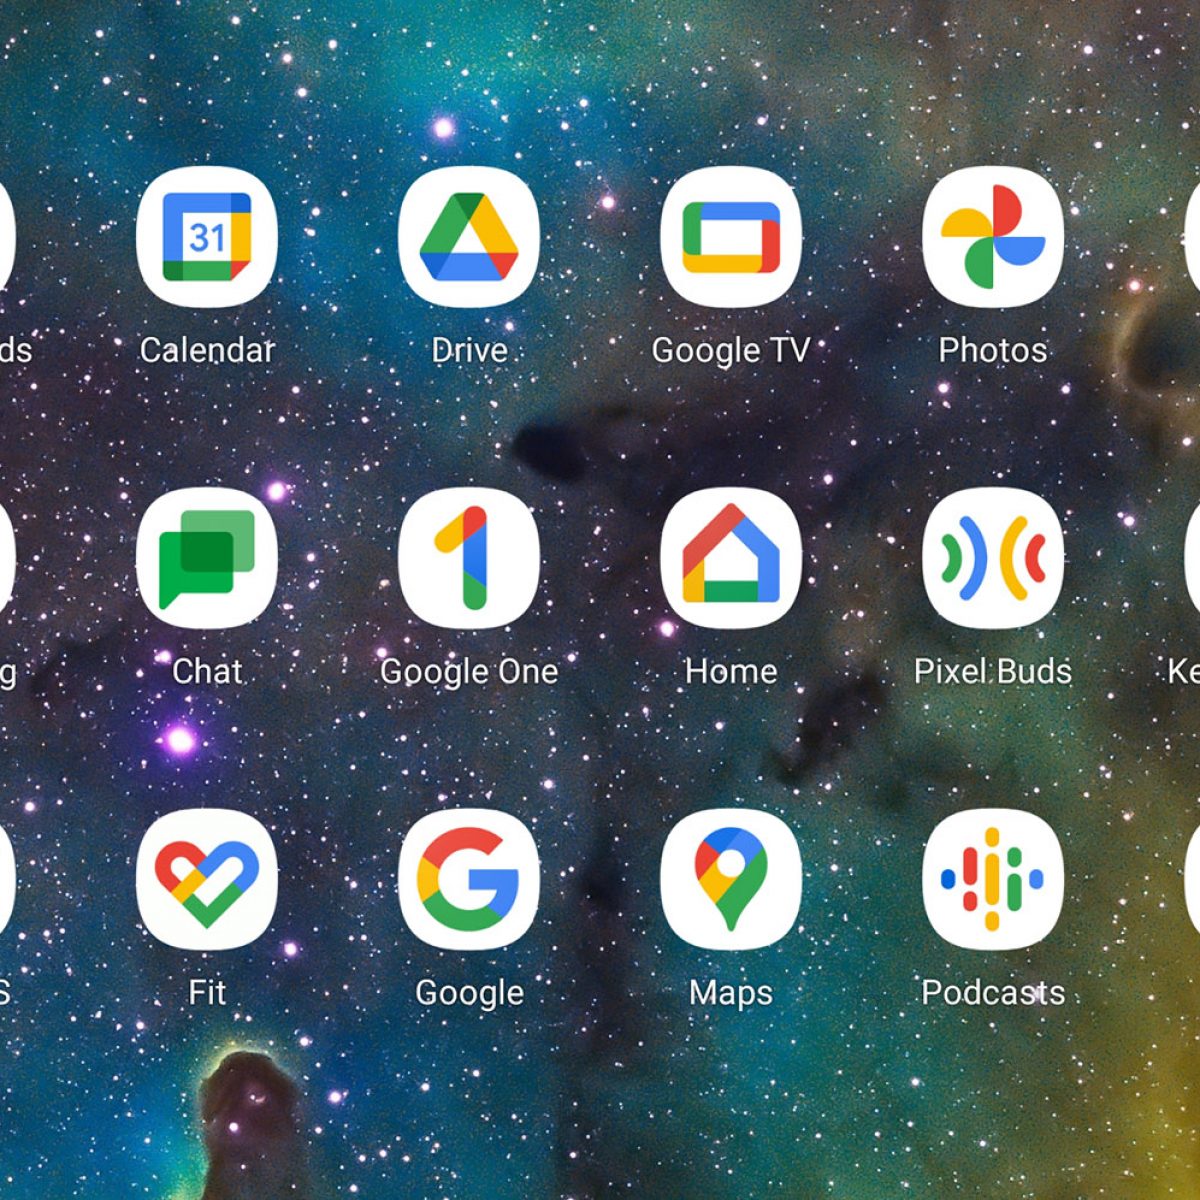 cool icons you can make on google